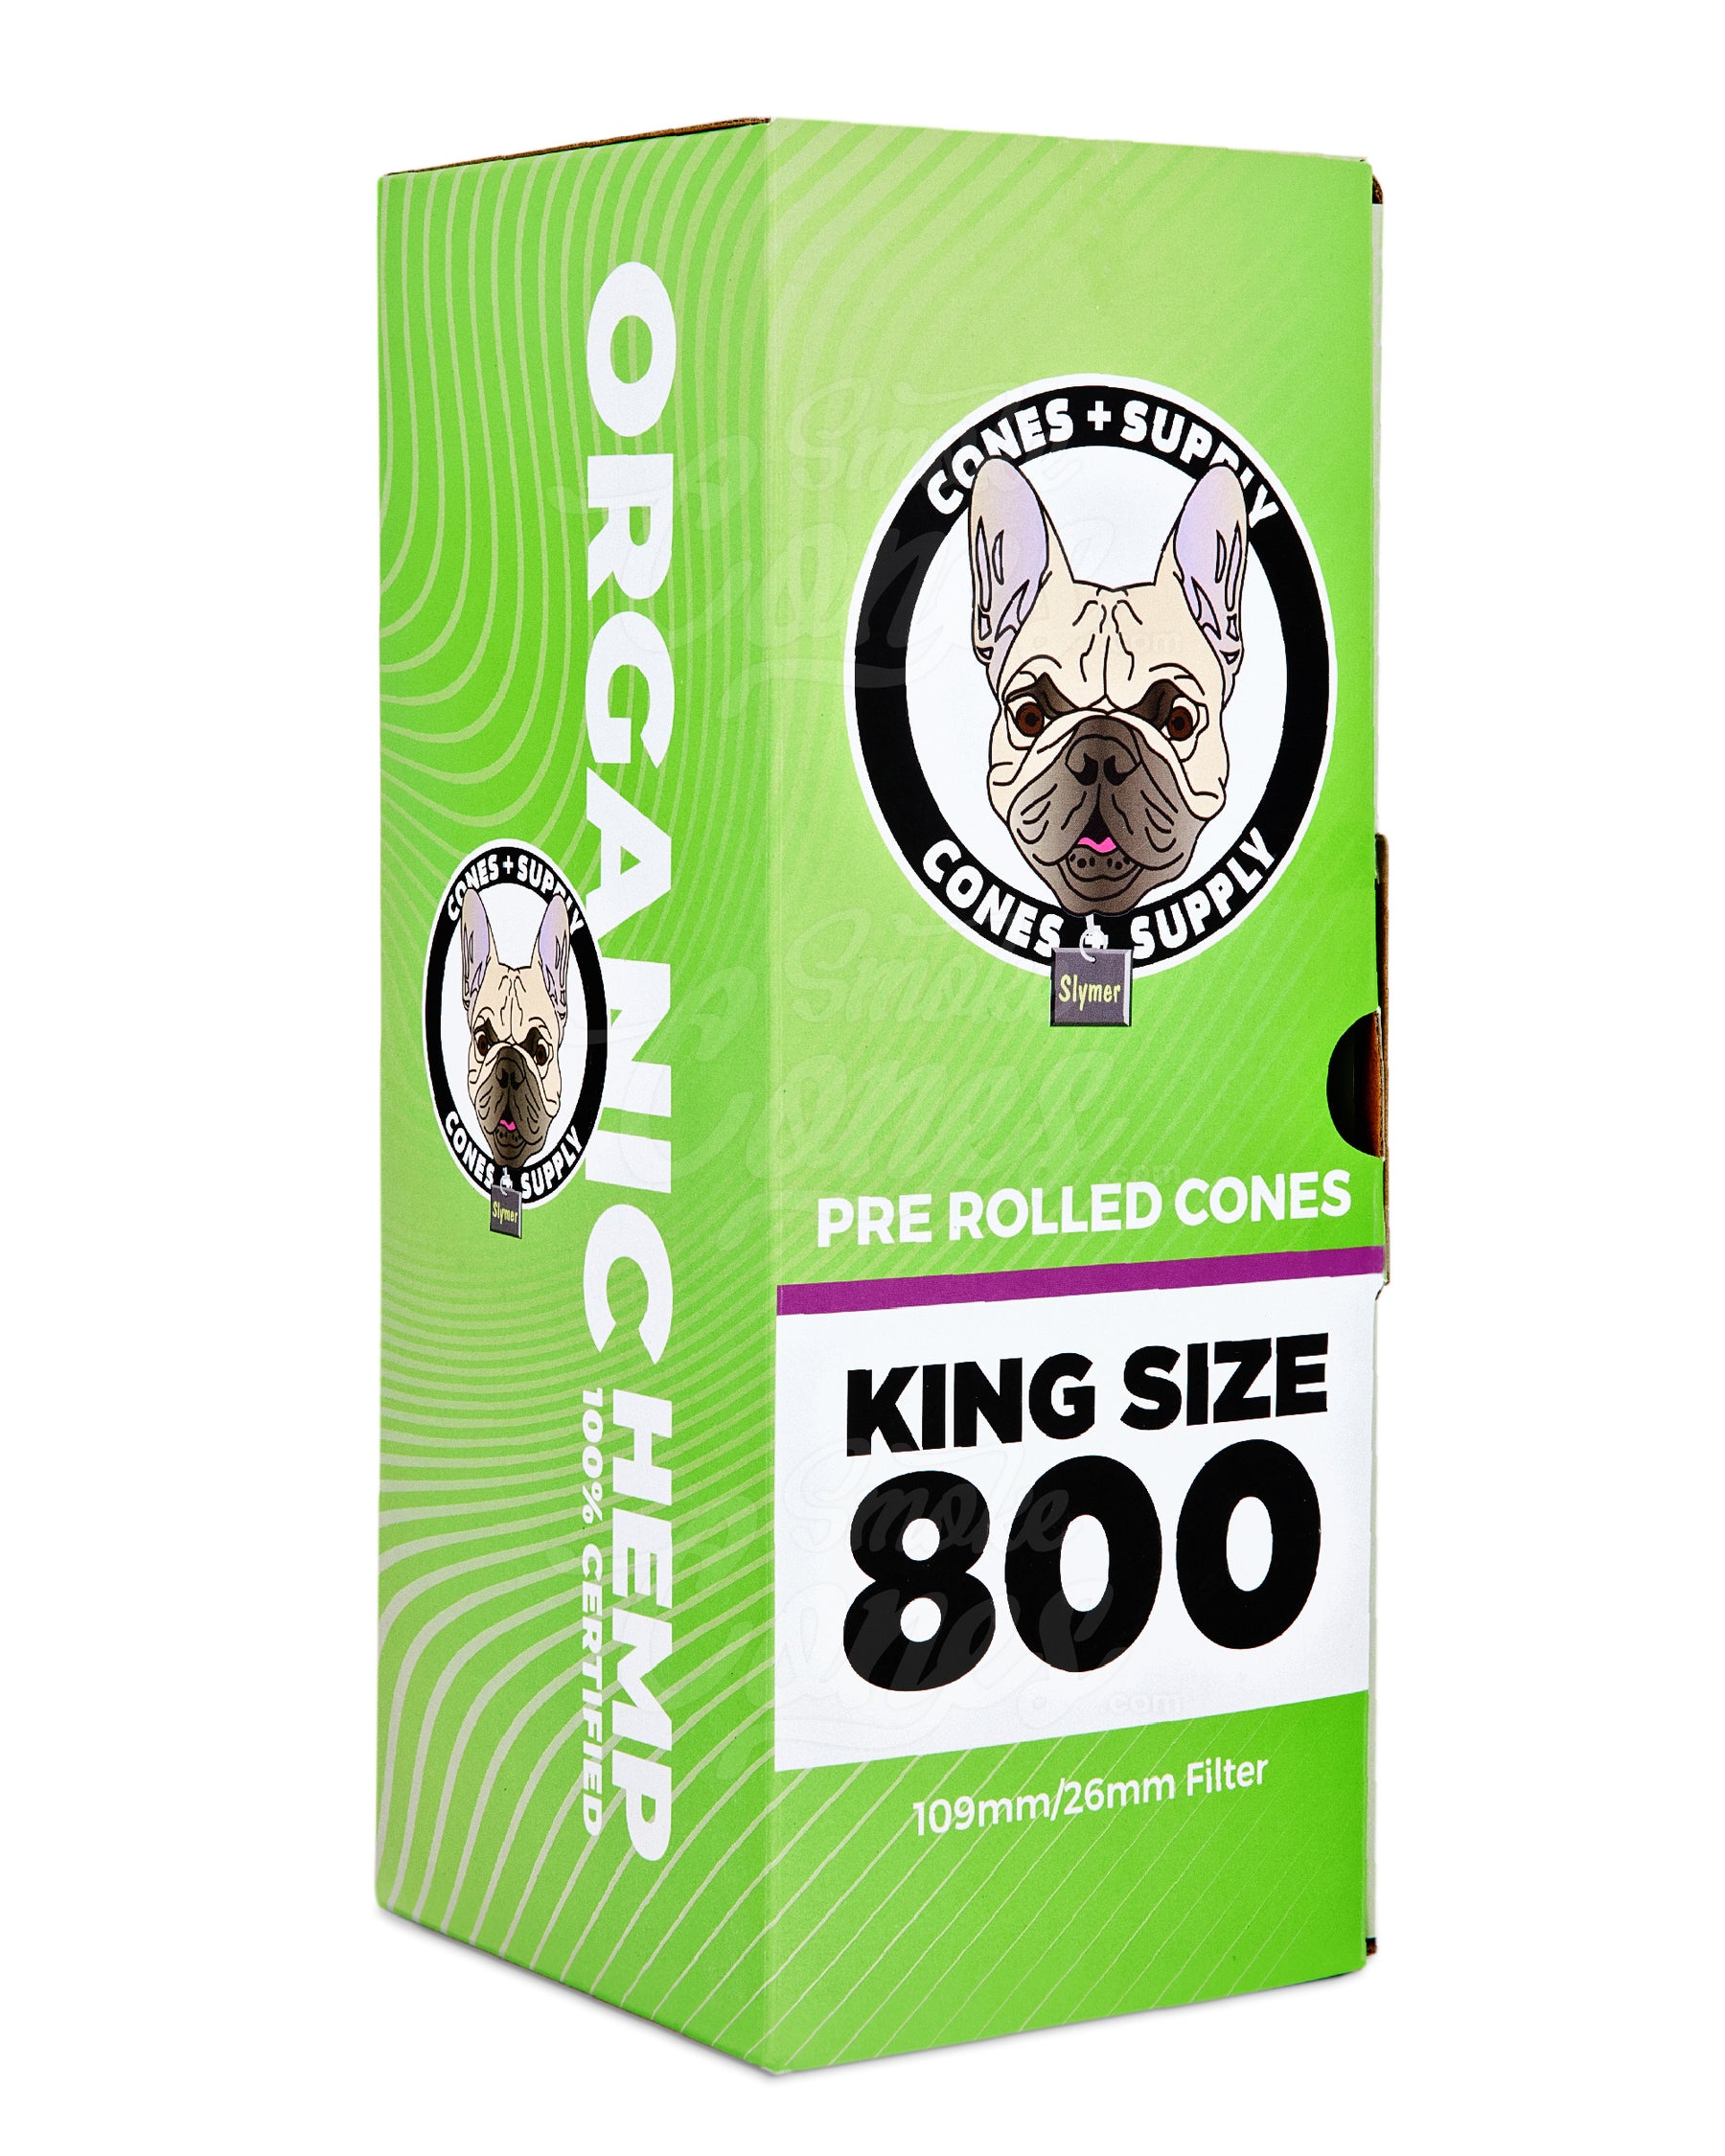 Cones + Supply 109mm King Sized Pre Rolled Organic Hemp Paper Cones 800/Box